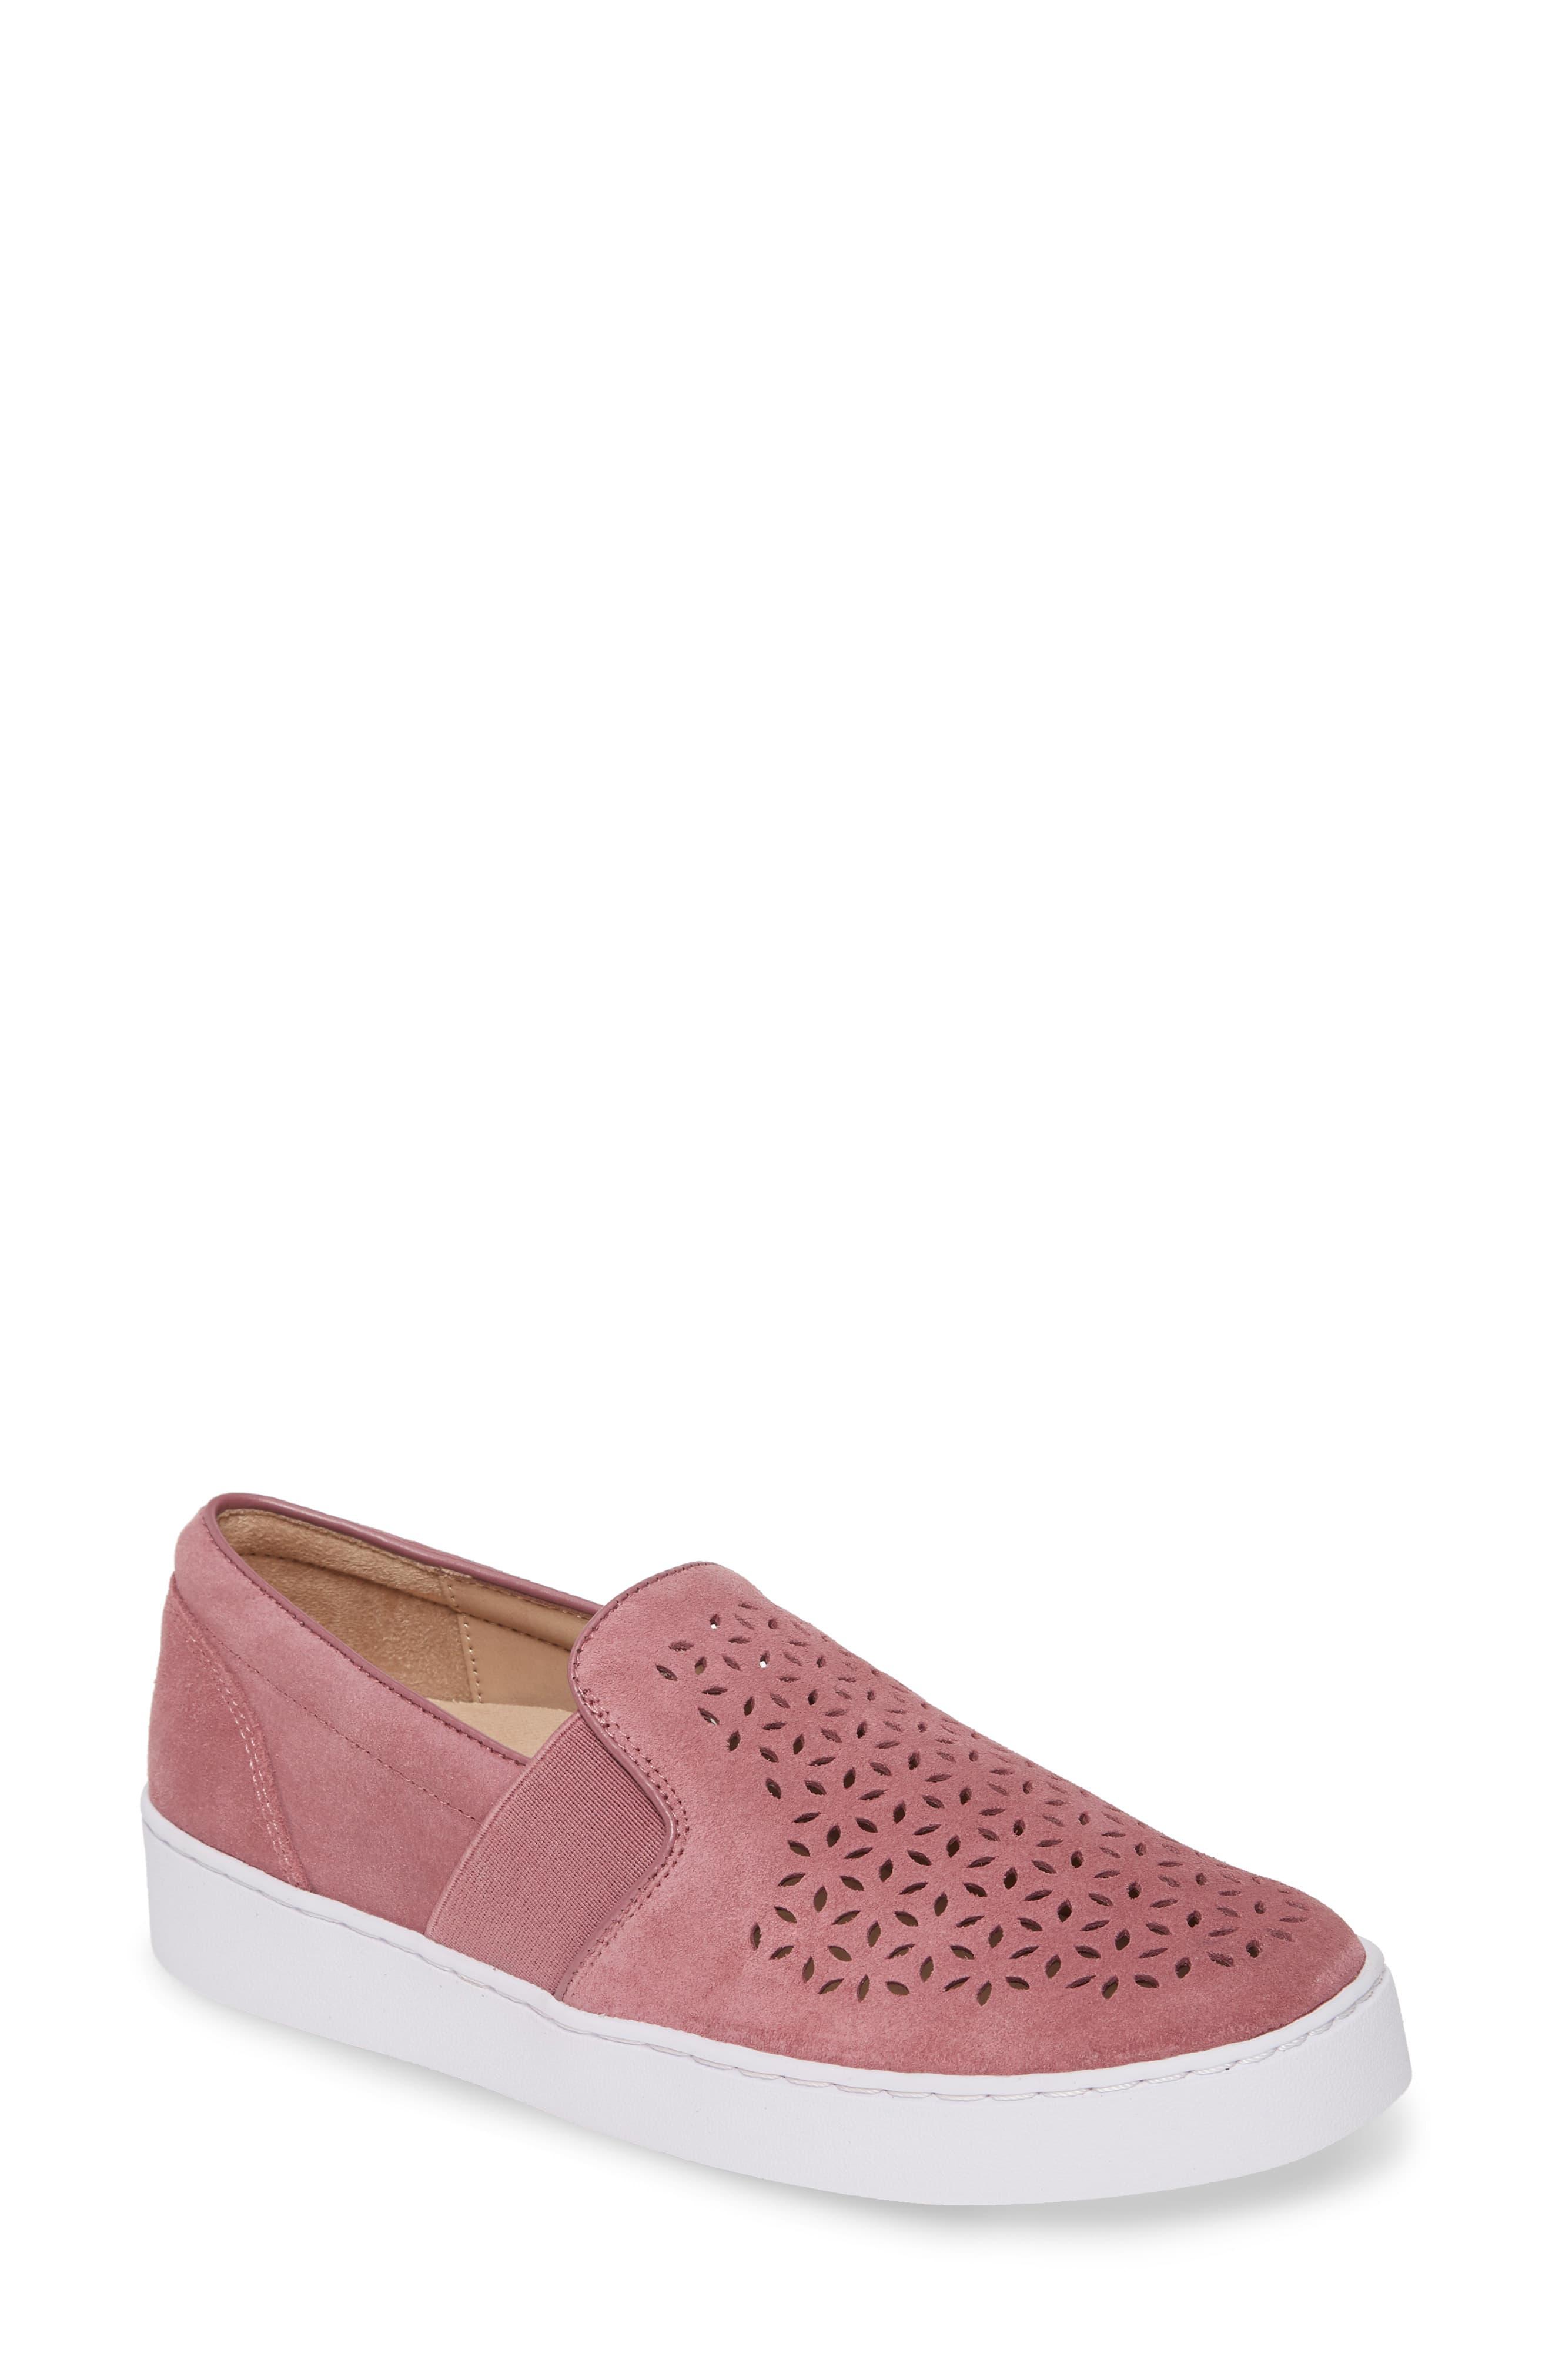 Vionic Suede Kani Perforated Slip-on Sneaker in French Rose Suede ...